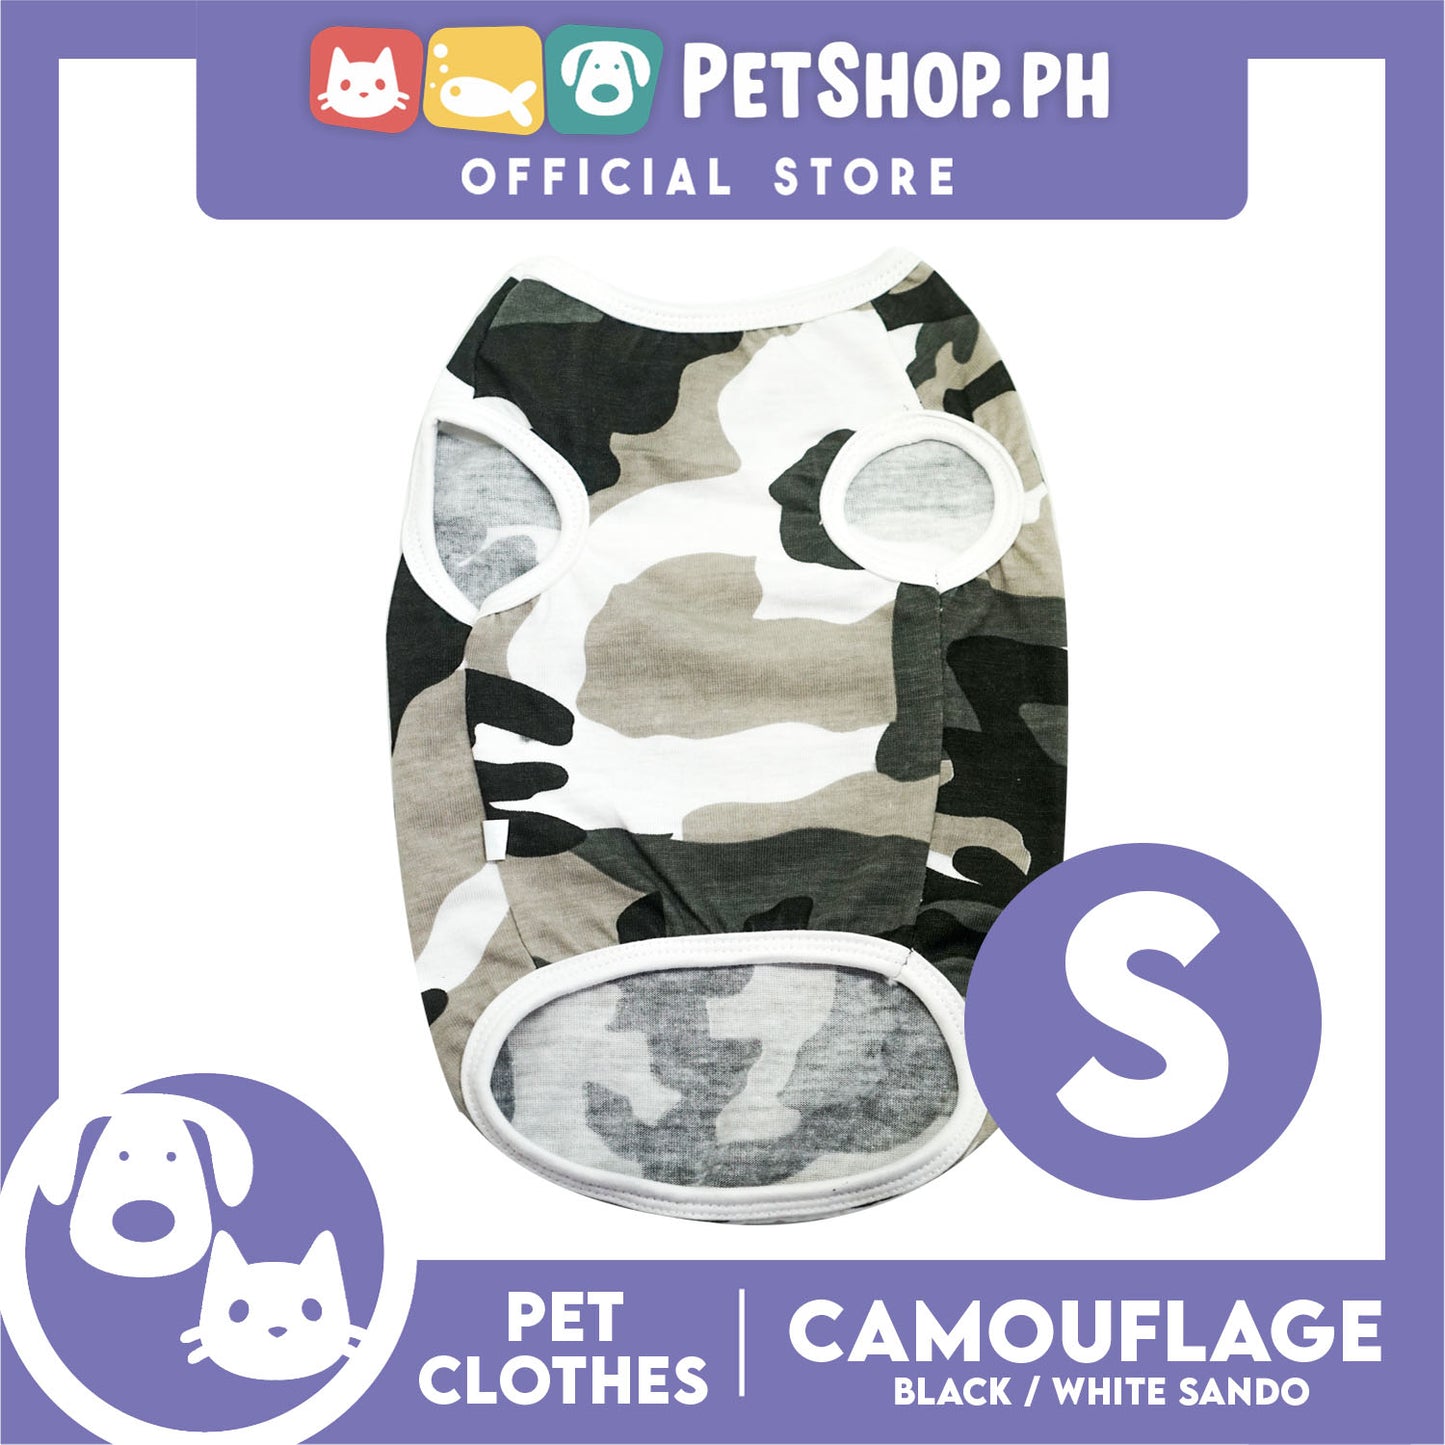 Pet Shirt Camouflage Black and White Sando (Small) Perfect Shirt for Male Dogs and Cats